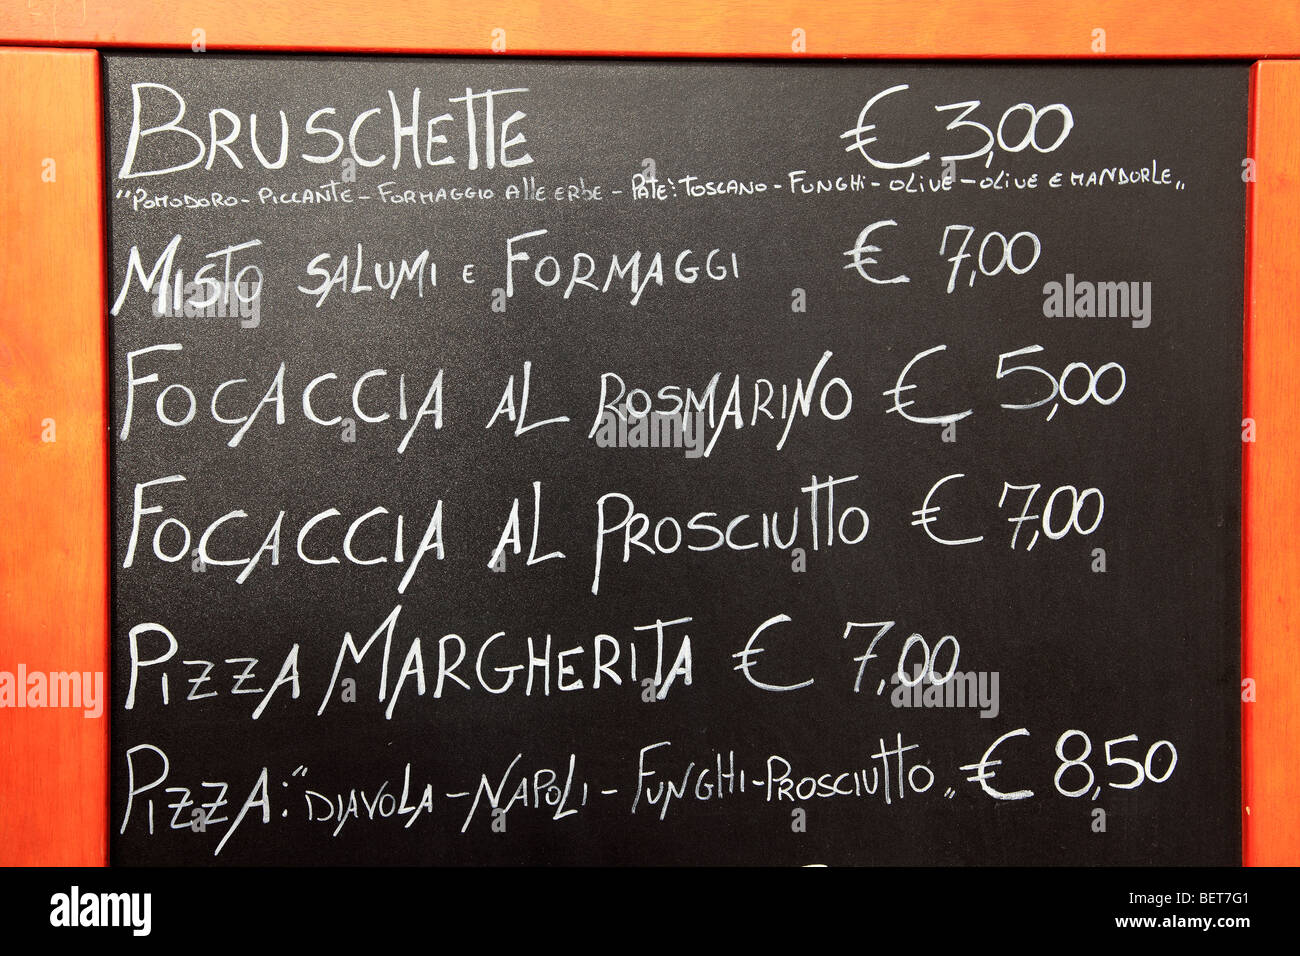 Menu outside cafe in Rome Stock Photo